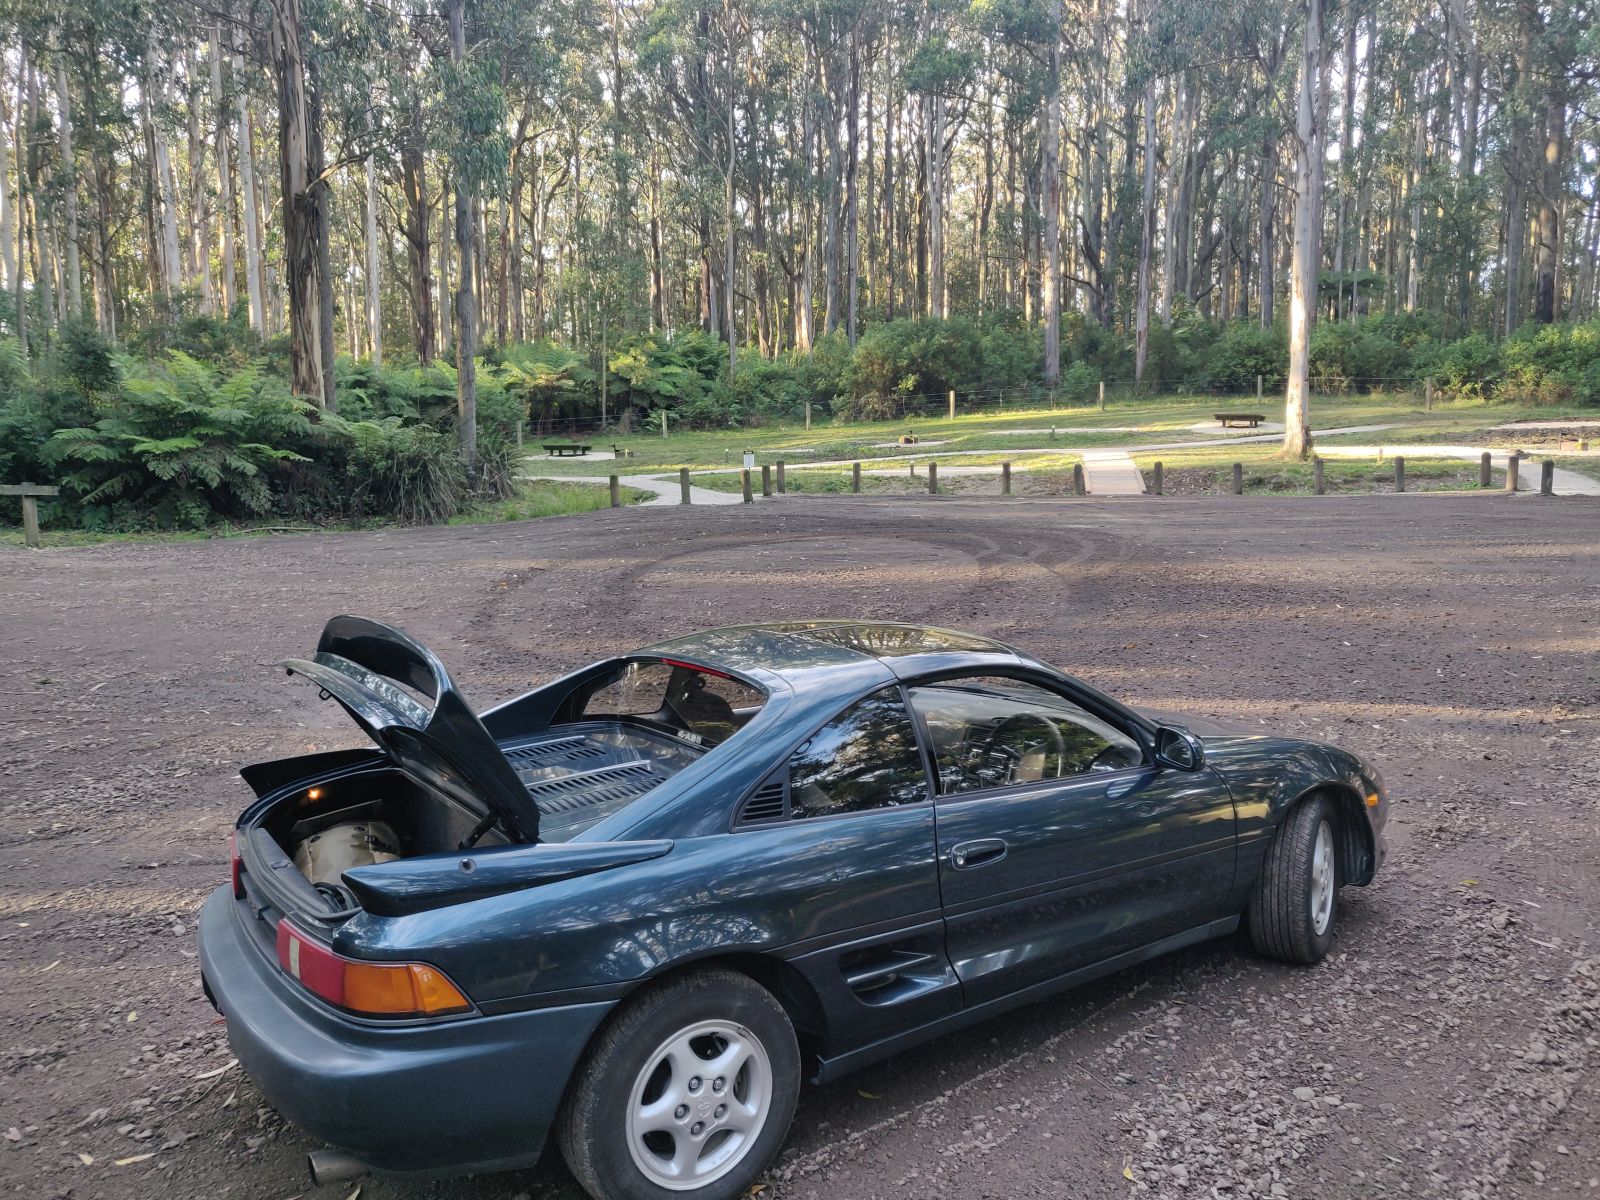 Checking out a campsite for later use, camping isn’t allowed for a few more days.
Some dickhead’s come and torn up the freshly laid gravel to lay circles! In unrelated news the MR2 does great first gear hoops